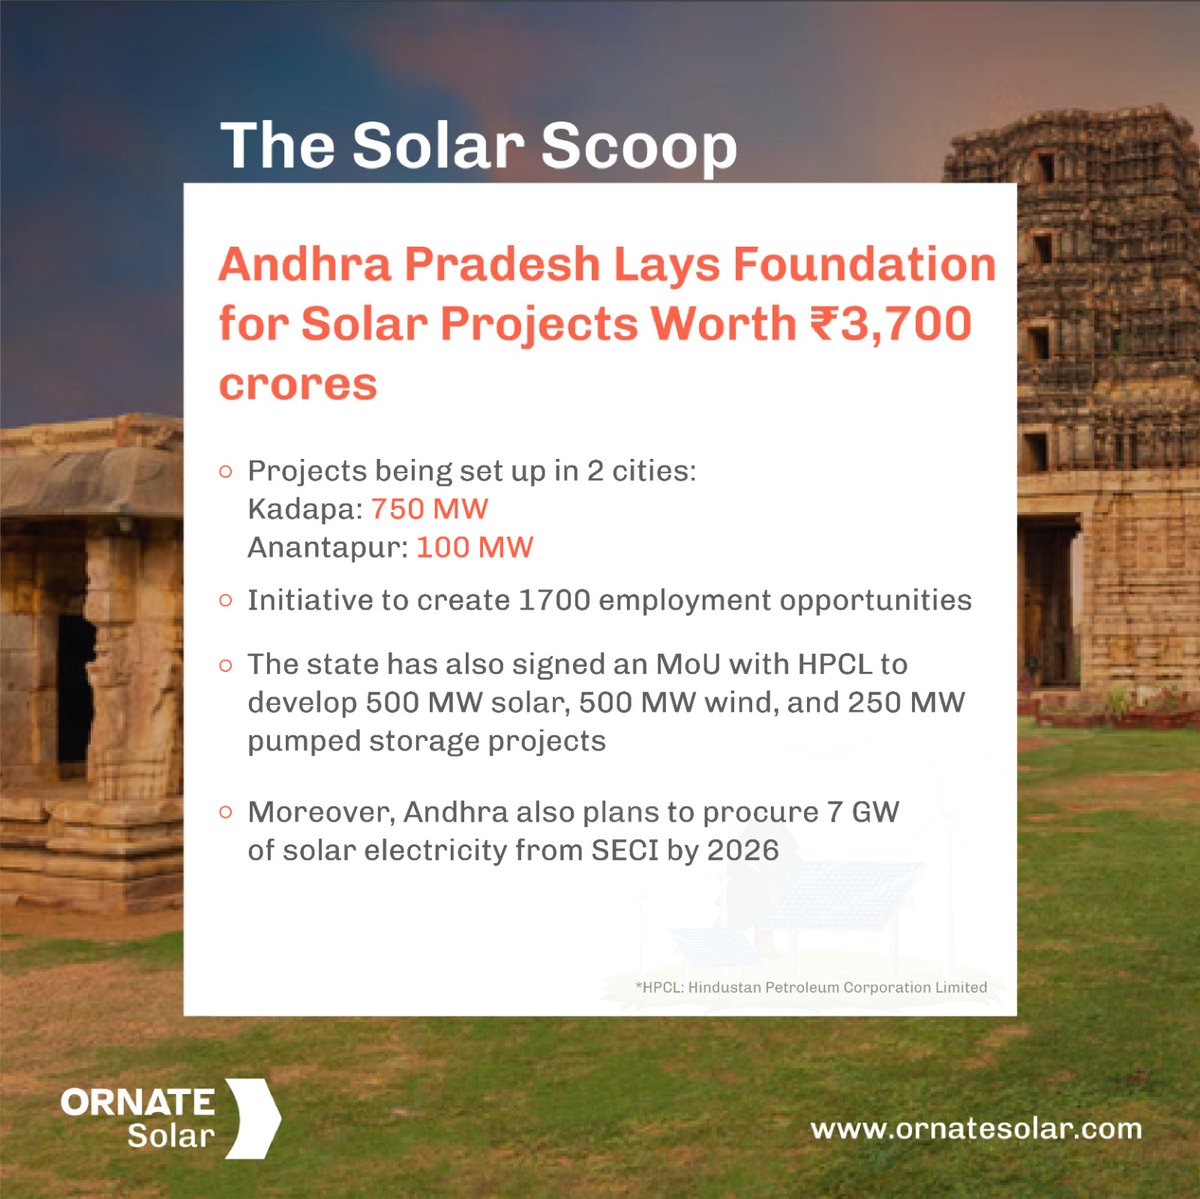 Andhra Pradesh Chief Minister has just unveiled 2 large-scale solar projects and 12 AP-Transco substations, in a bid to expand renewable energy infrastructure in the state. 

Read the full scoop here👇🏽
.
.
#OrnateSolar #Solarscoop #Solarenergy